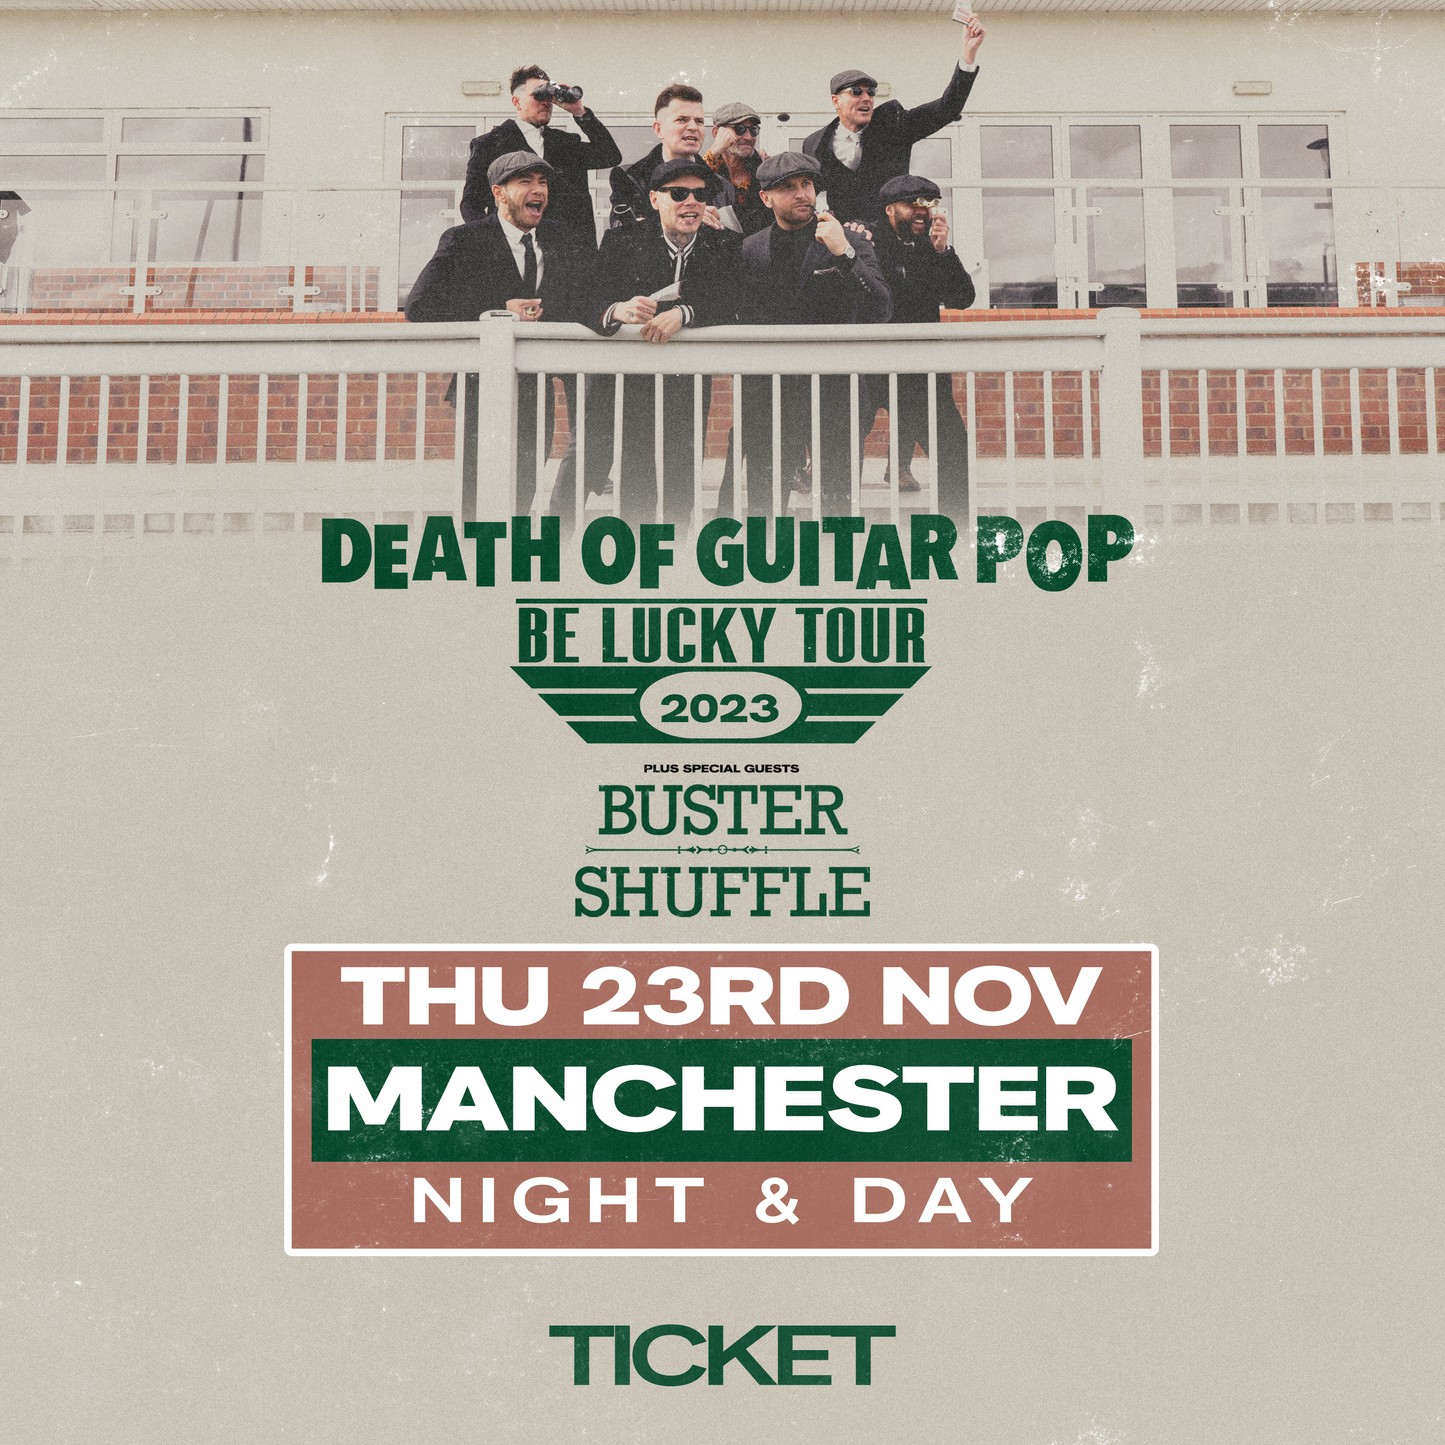 MANCHESTER - NIGHT & DAY 23/11/23 - GENERAL ADMISSION